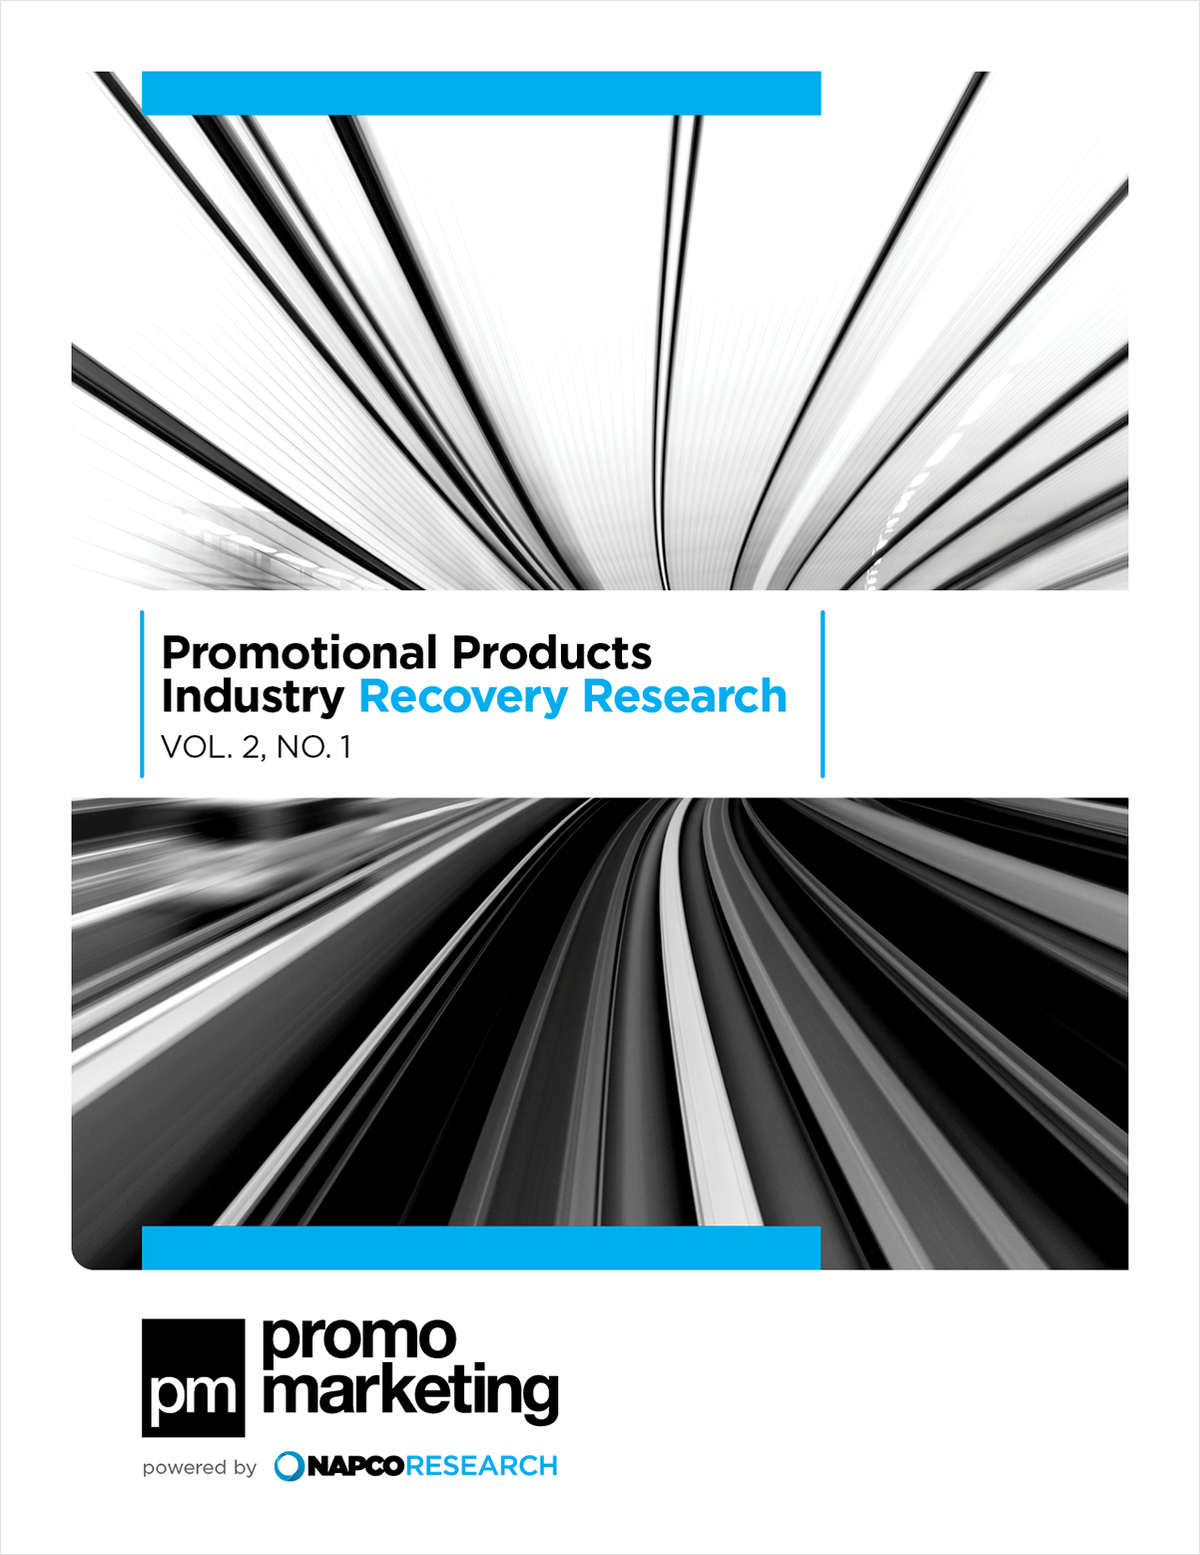 Promotional Products Industry Recovery Research Vol. 2, No. 1